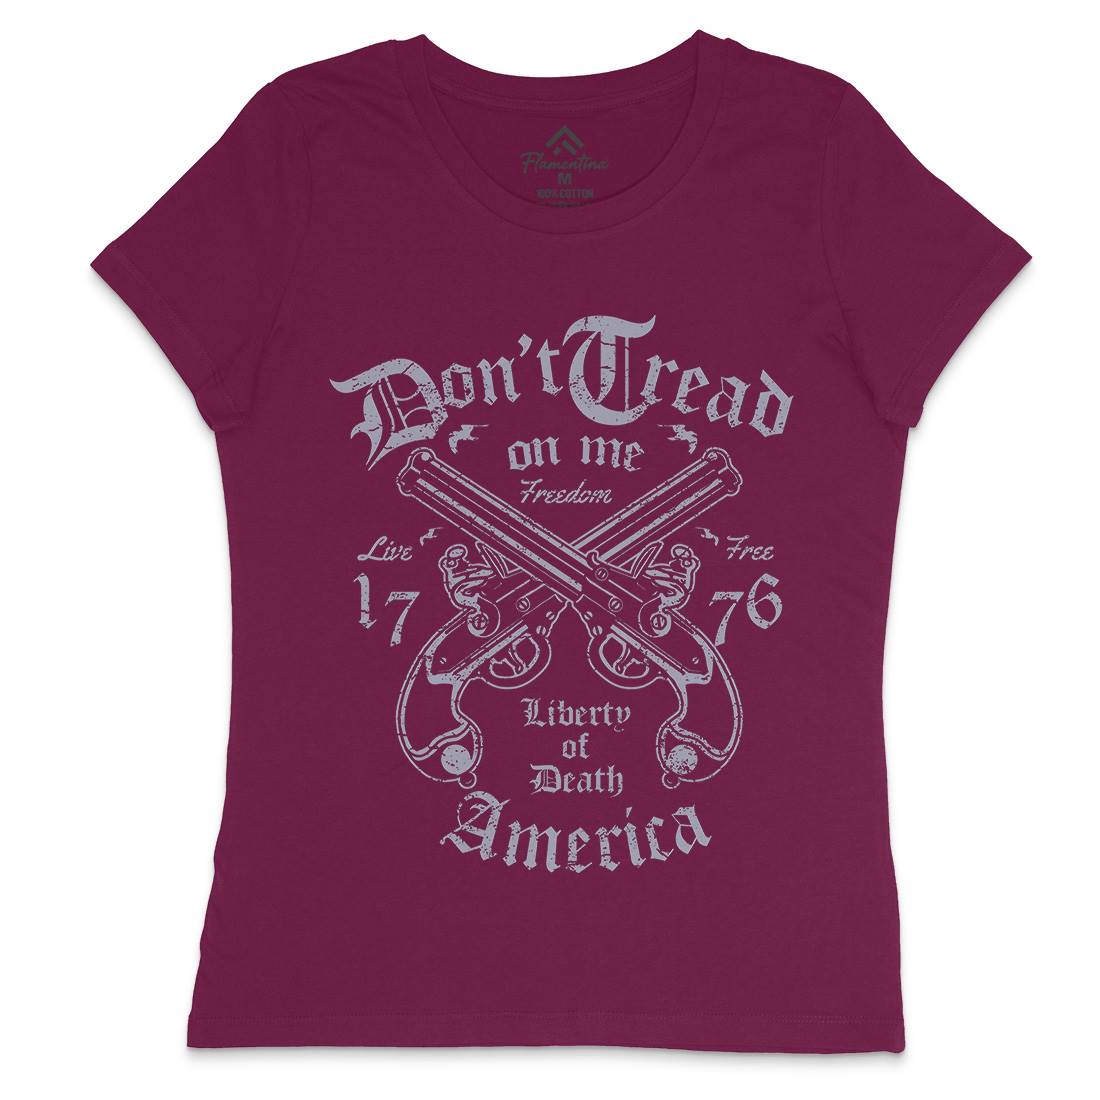 Liberty Of Death Womens Crew Neck T-Shirt American A084